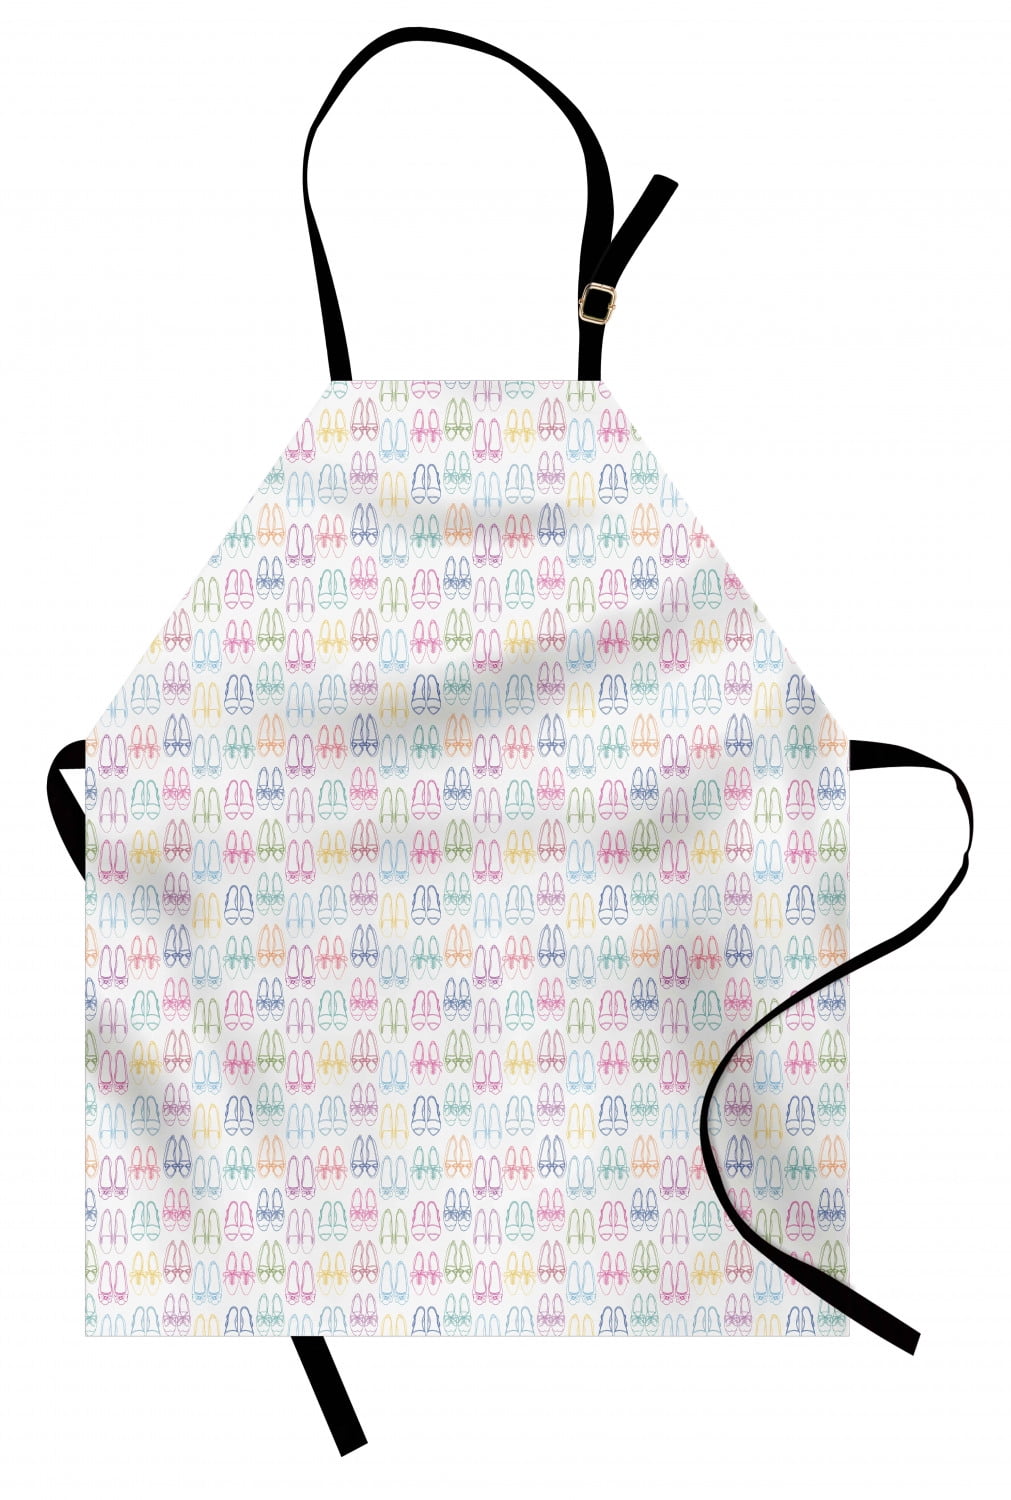 Durable Apron Bib Adjustable Neck for Cooking Gardening Ambesonne 